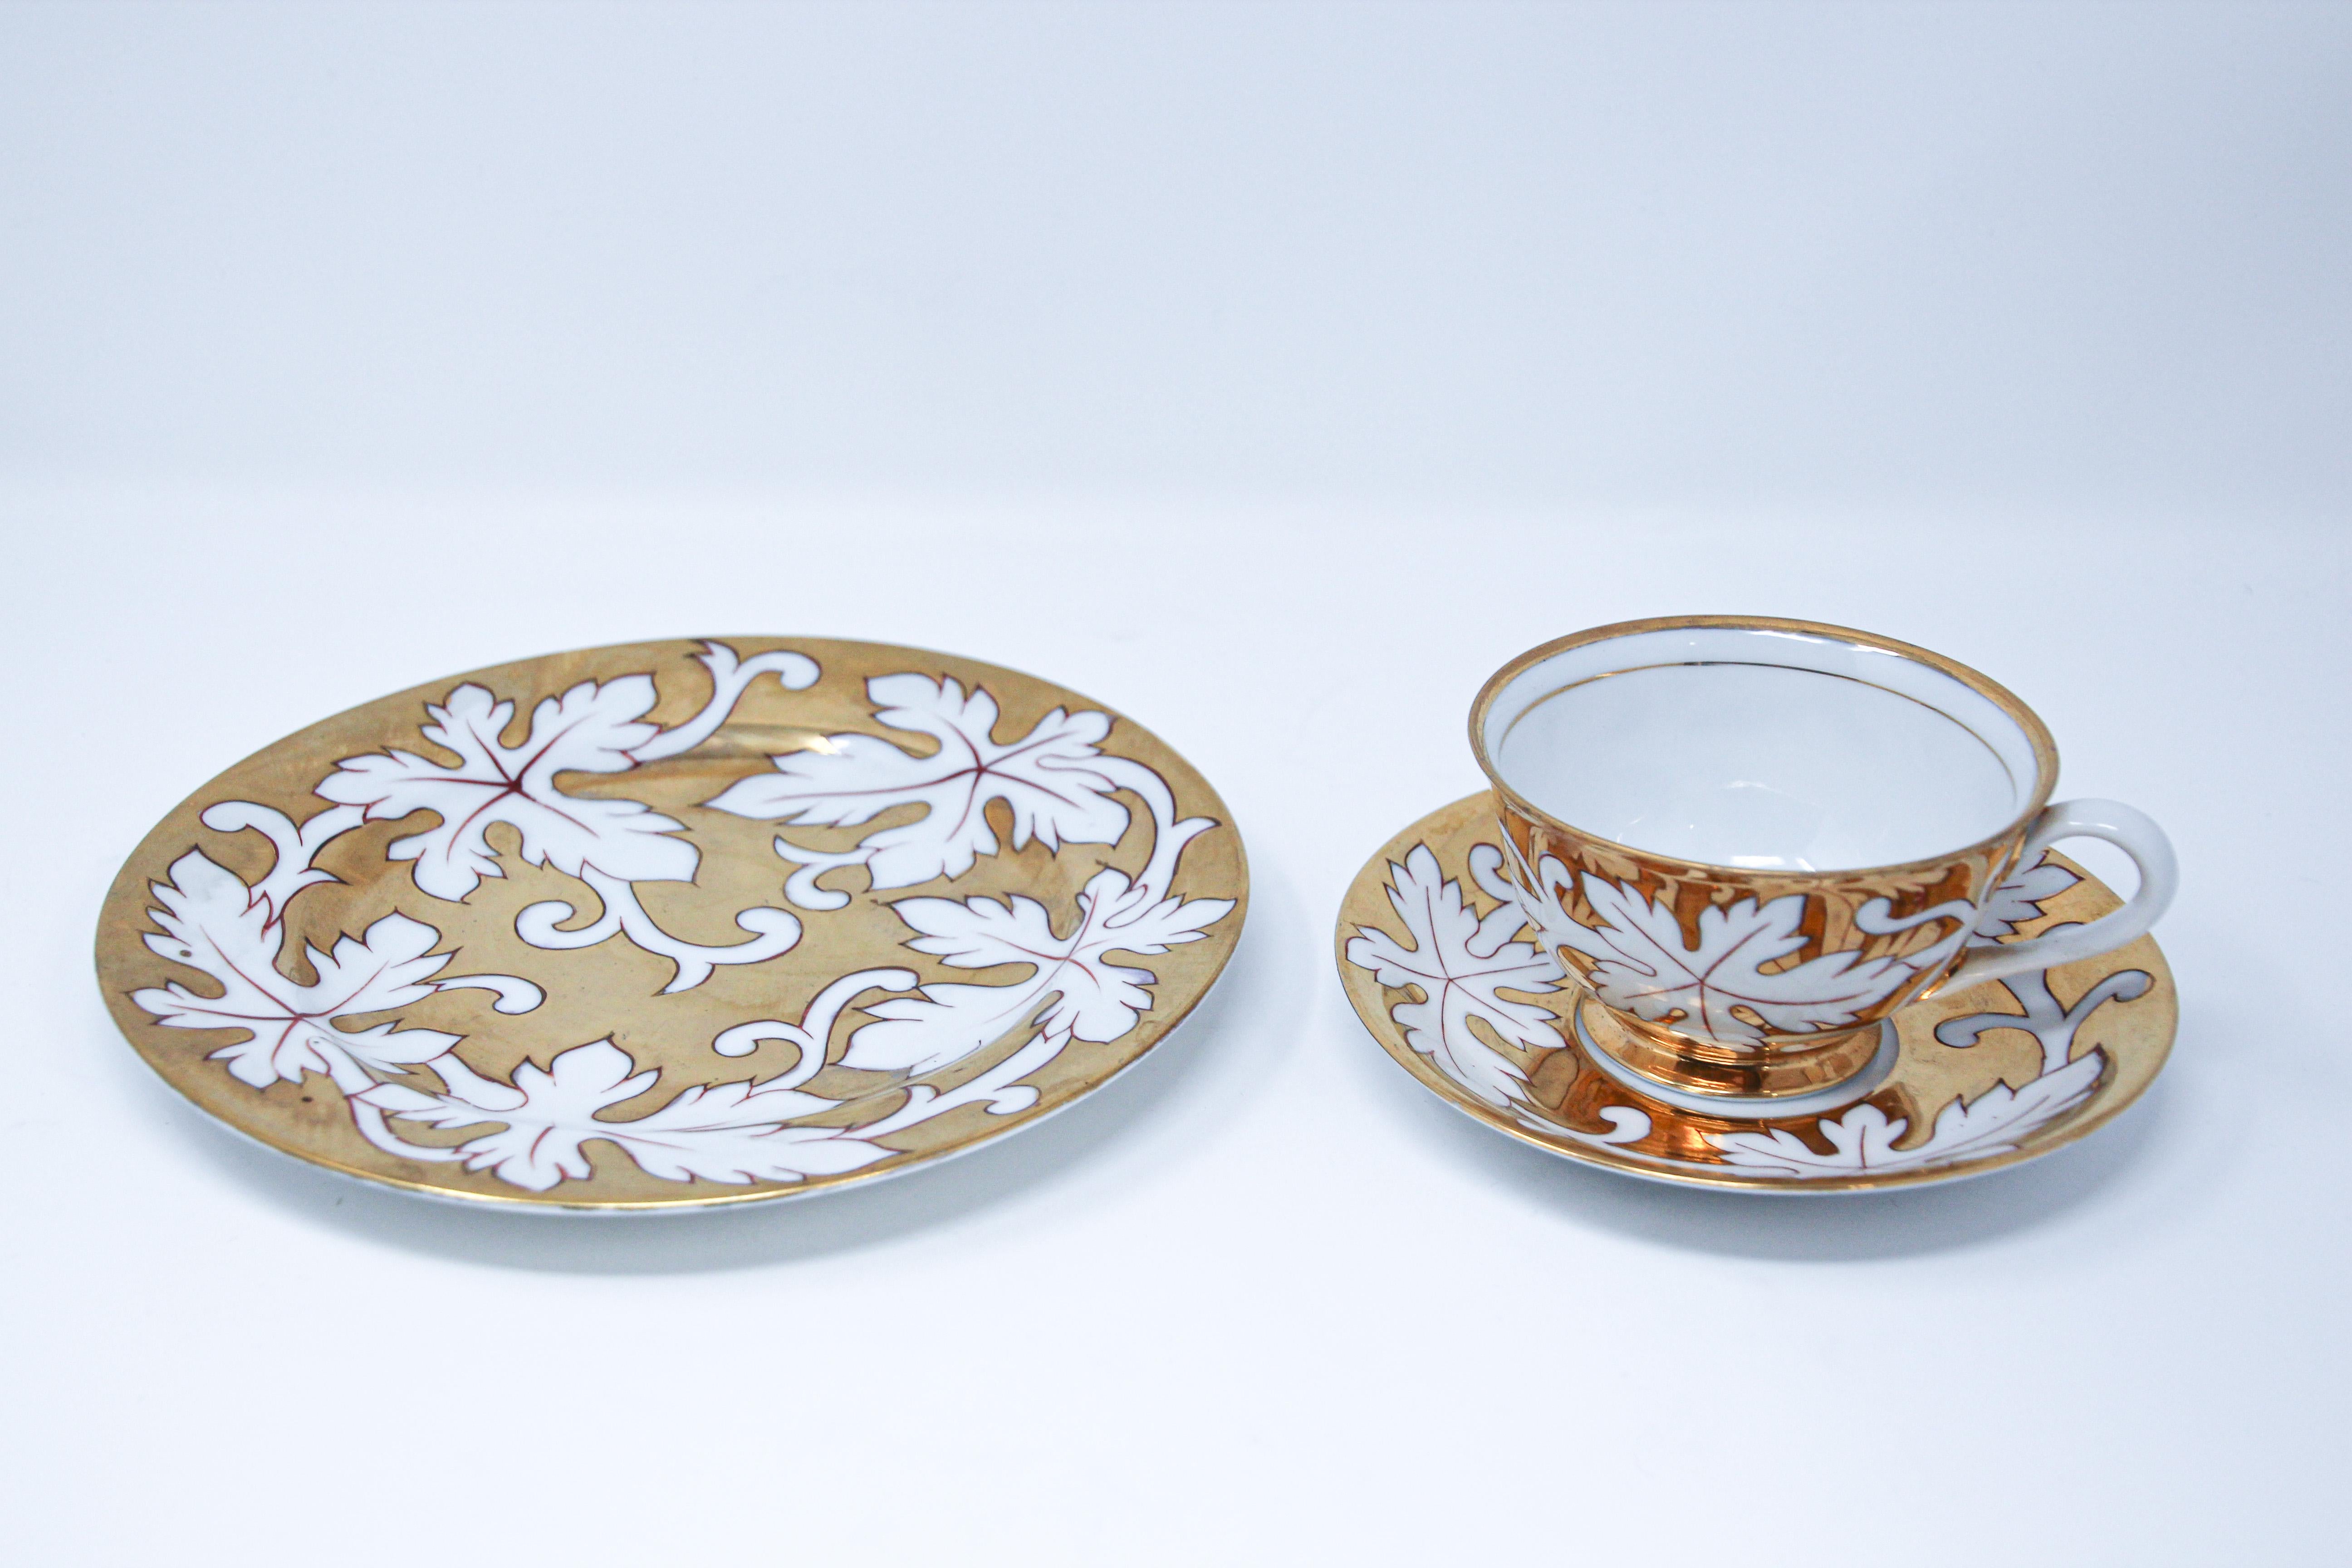 Hand Painted Gilt Porcelain Tea, Coffee Cup with Desert Plate For Sale 1